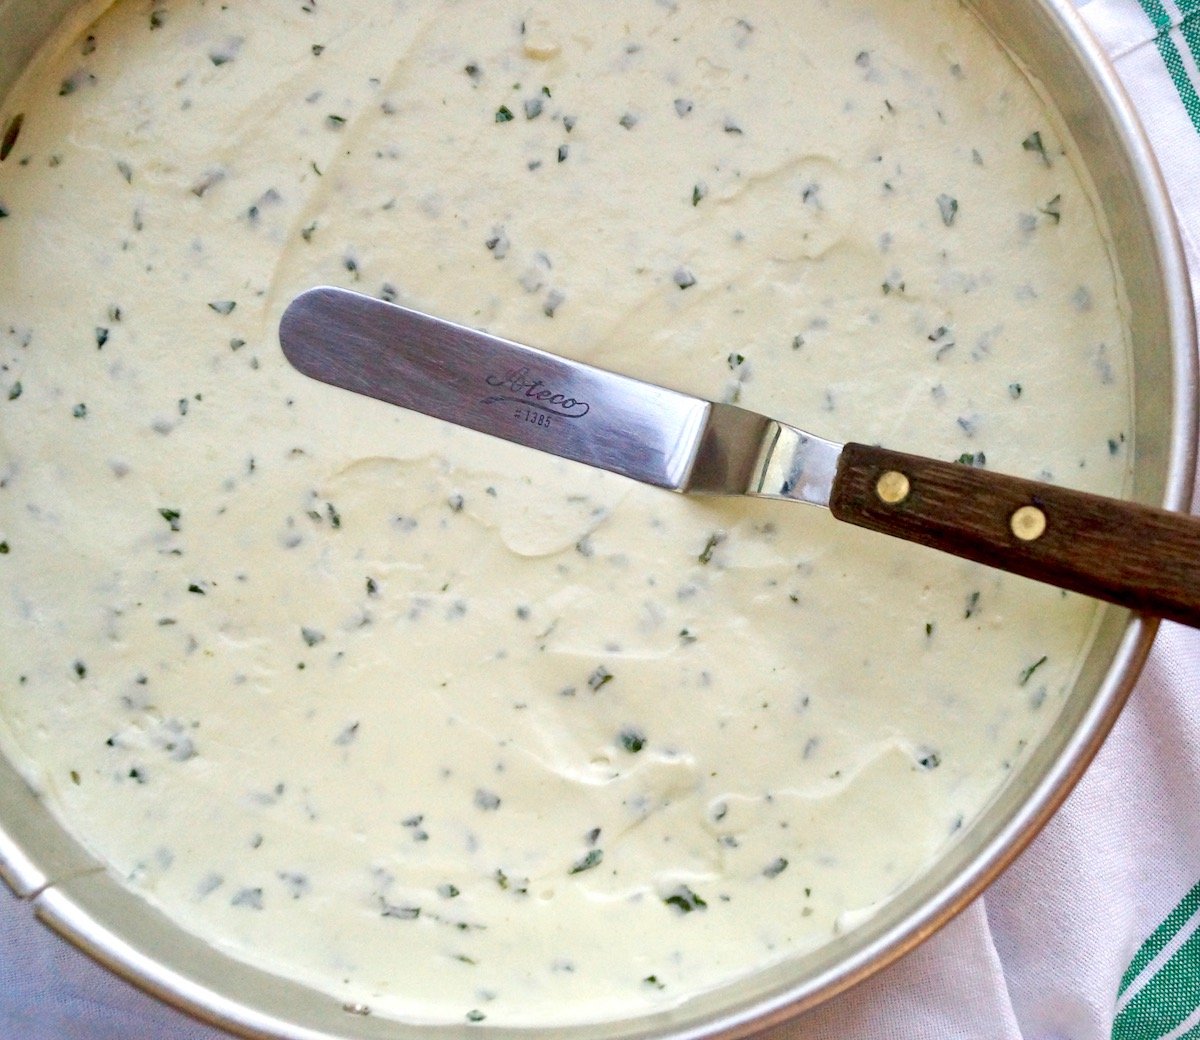 Basil cheesecake filling spread evenly on top of cookie crust in a springform pan.